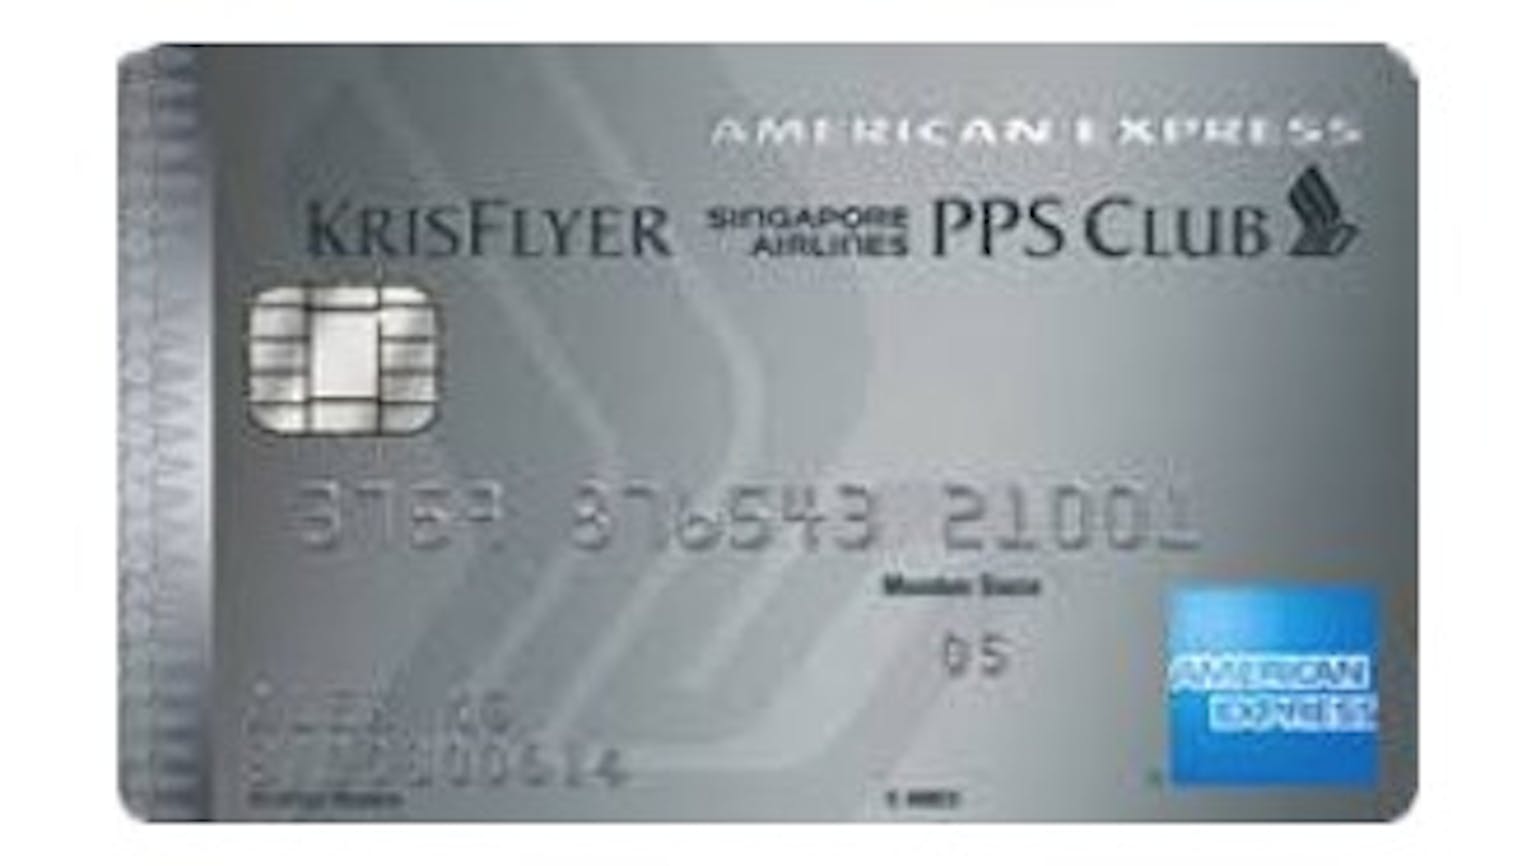 American Express Singapore Airlines PPS Club Credit Card